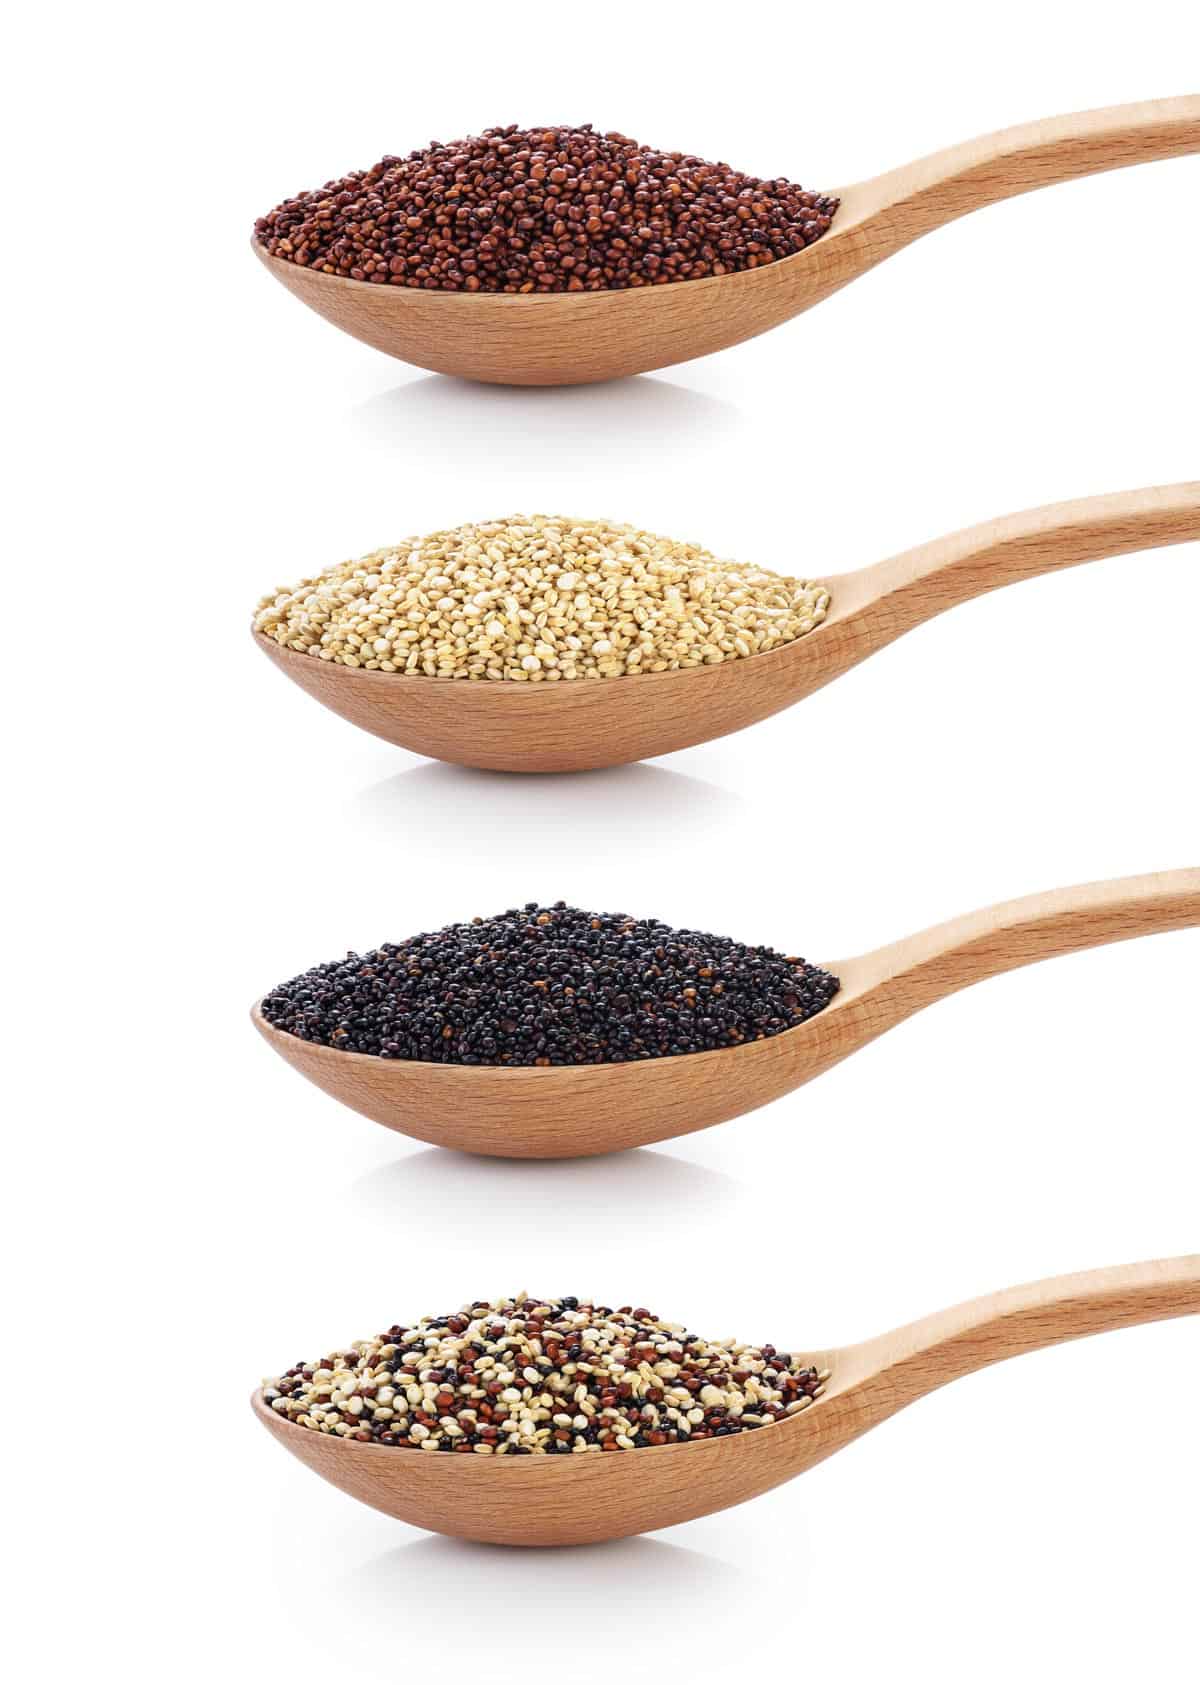 4 wooden spoon with quinoa positioned vertically on a background.